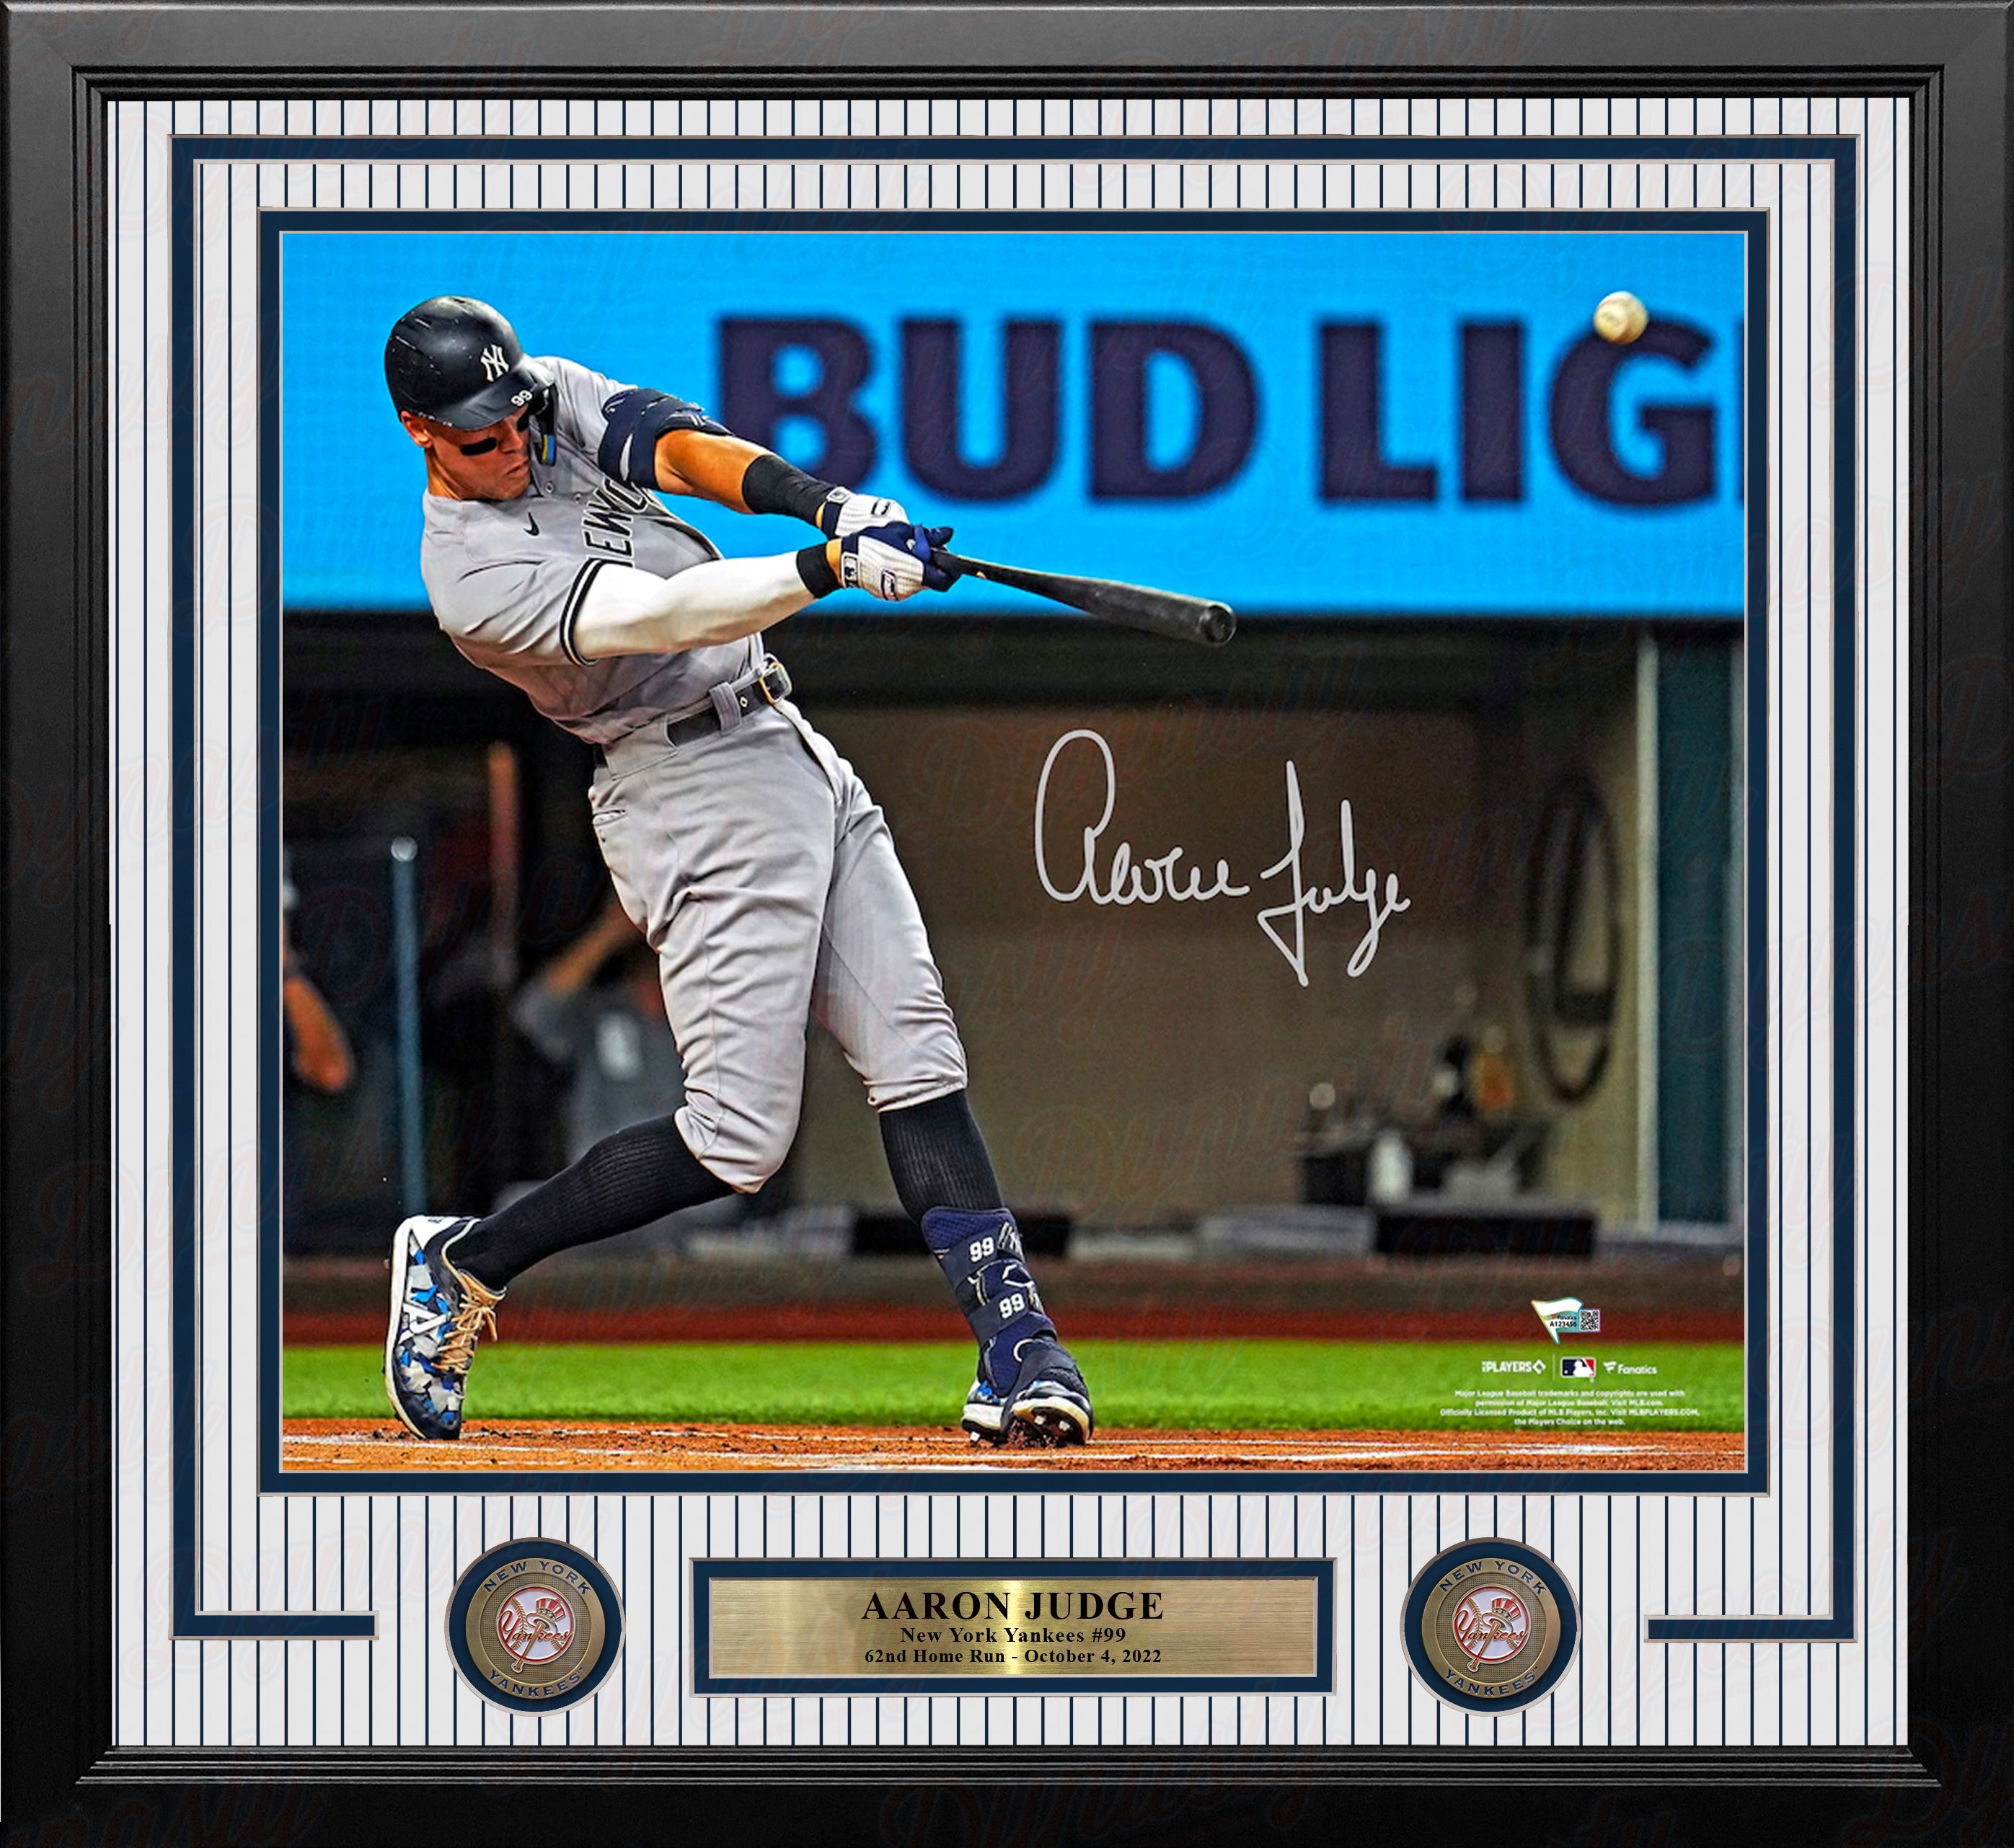 Aaron Judge in Action New York Yankees 8 x 10 Framed Baseball Photo with  Engraved Autograph - Dynasty Sports & Framing